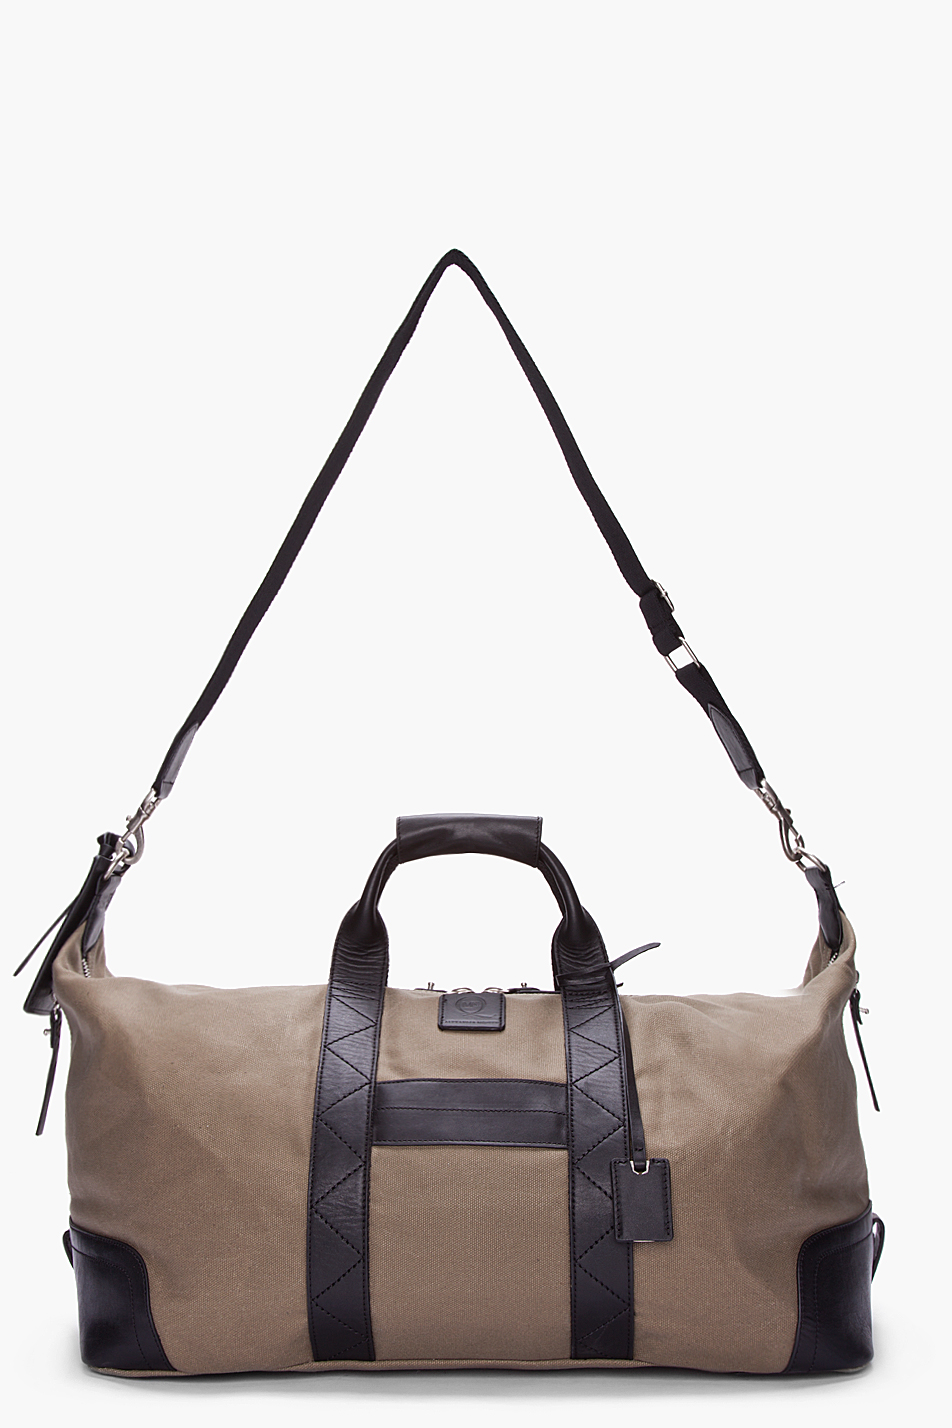 Lyst - McQ Canvas Weekender Bag in Green for Men